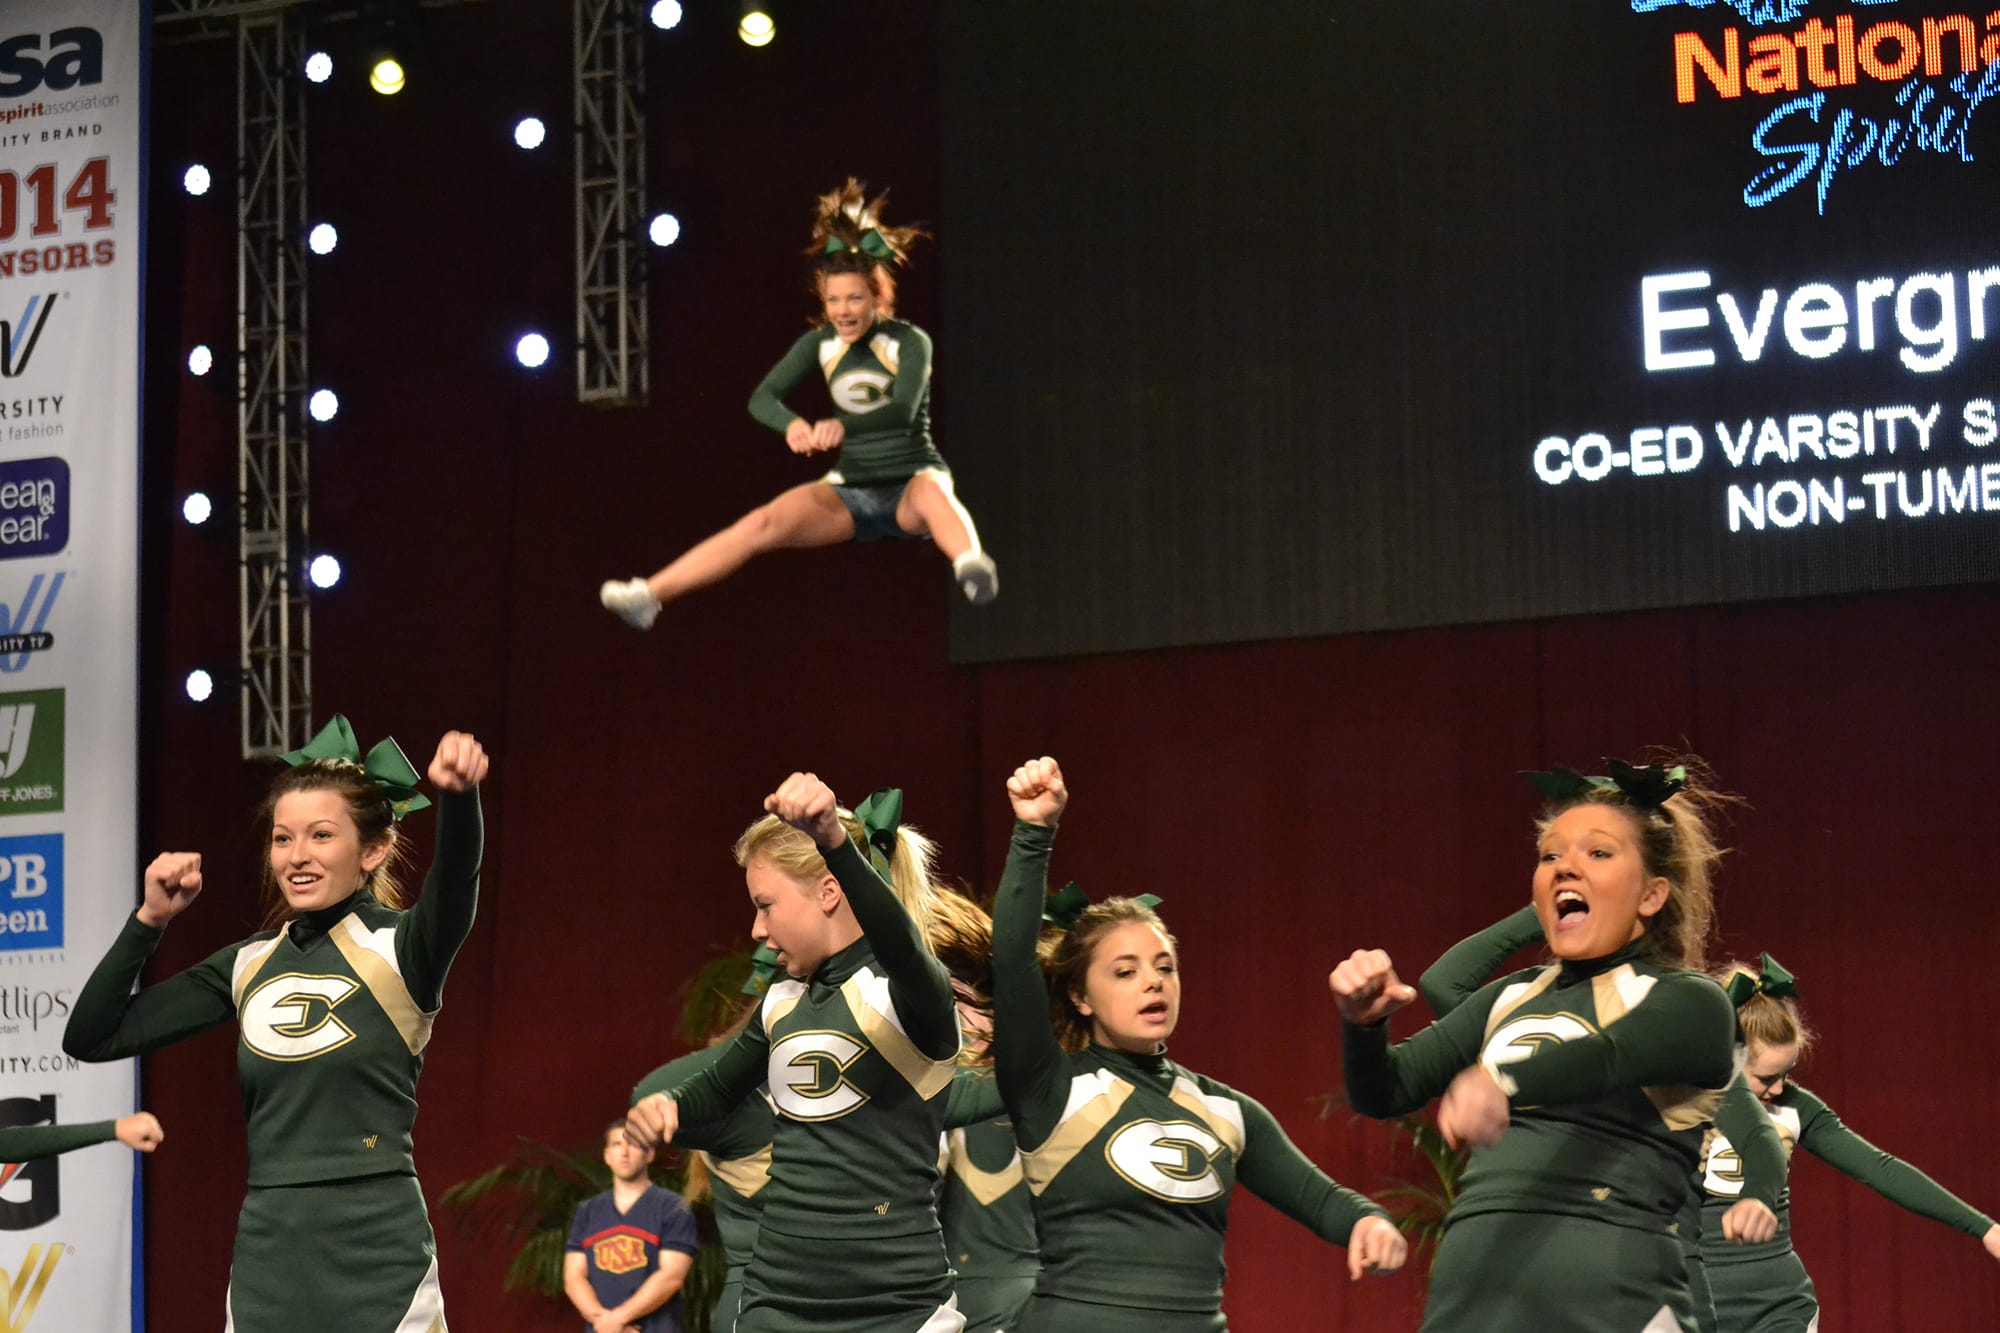 Evergreen High School: Evergreen High School's varsity cheer team members perform in the finals on March 30 at the USA Spirit National Competition in Anaheim, Calif., where they placed second in their division.